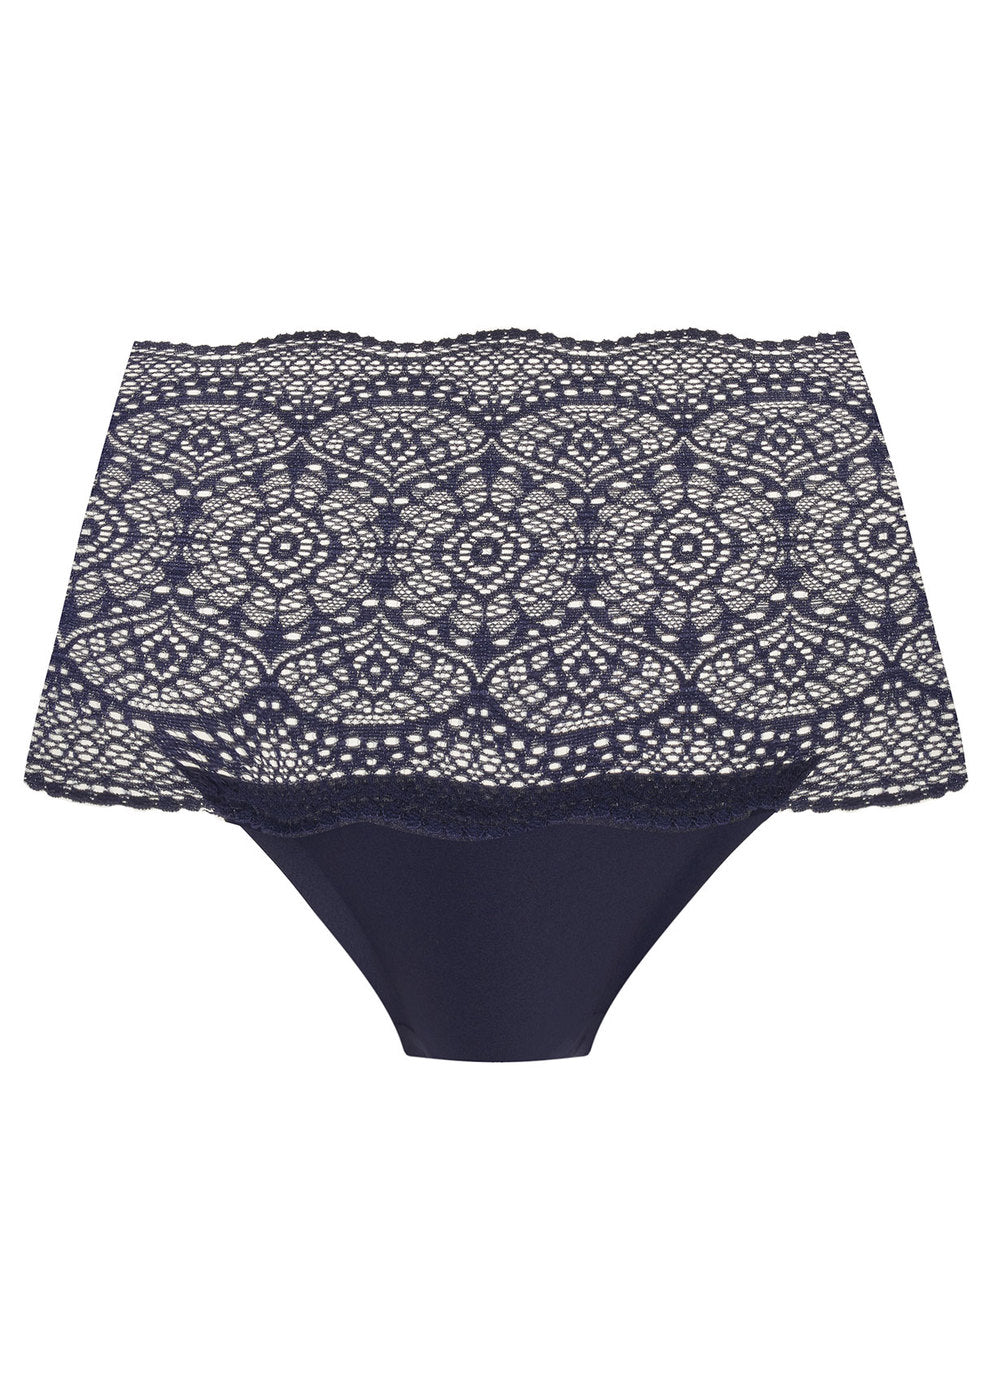 Lace Ease Invisible Stretch Full Brief FL2330 NVY - Navy